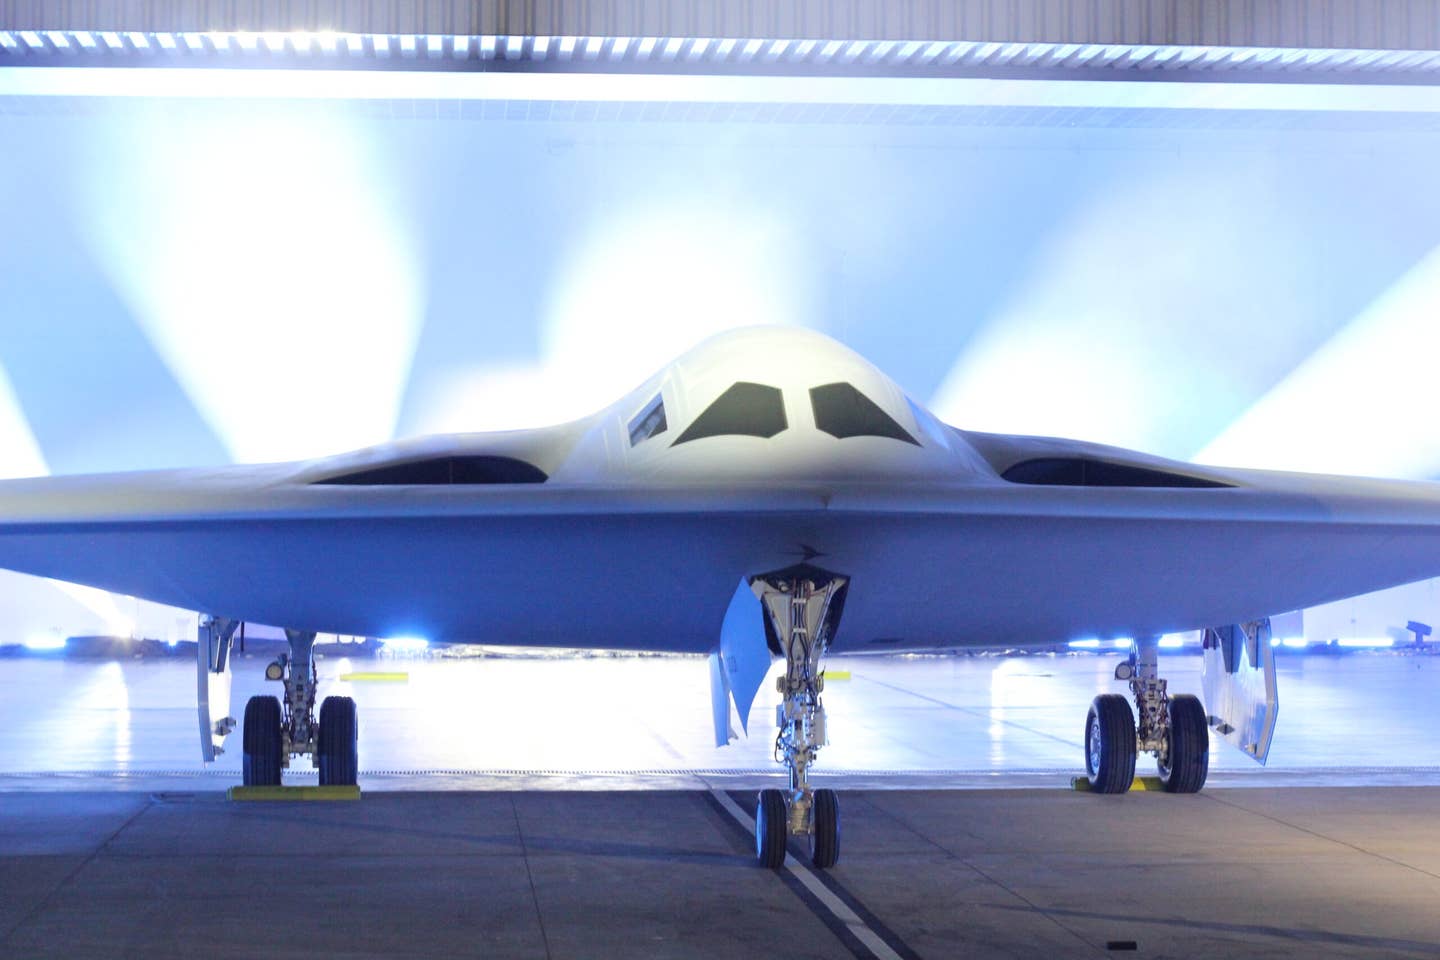 The B-21 Raider, revealed to the public for the first time on Friday, is scheduled to make its first flight sometime next year. (Howard Altman/<em>The War Zone</em> photo)